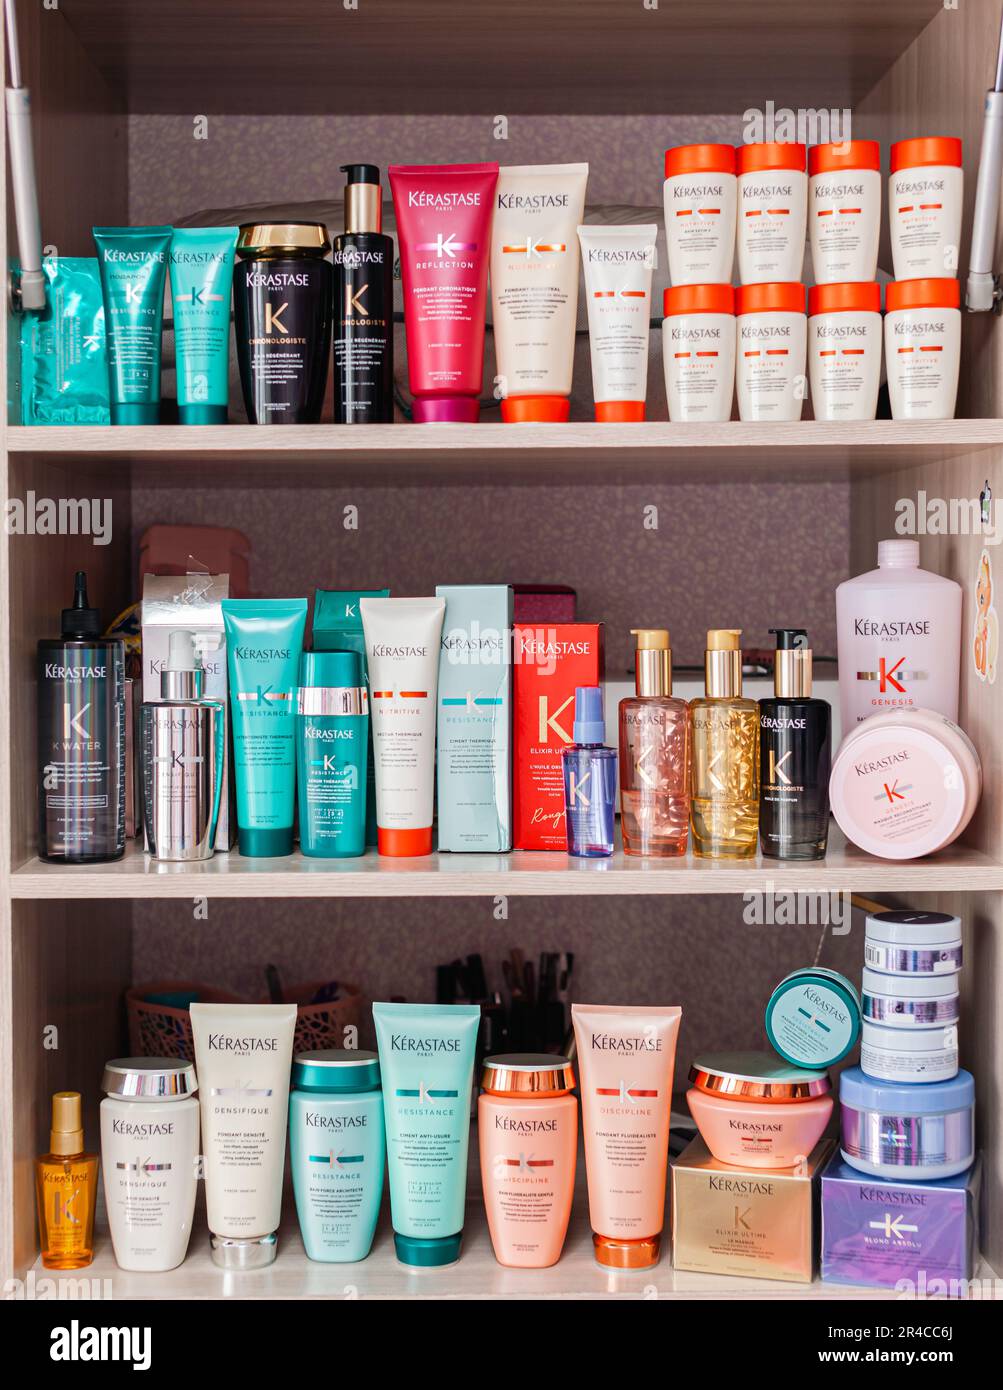 https://c8.alamy.com/comp/2R4CC6J/many-different-jars-of-shampoo-hair-care-balms-on-the-shelf-jars-and-tubes-stand-in-a-row-2R4CC6J.jpg